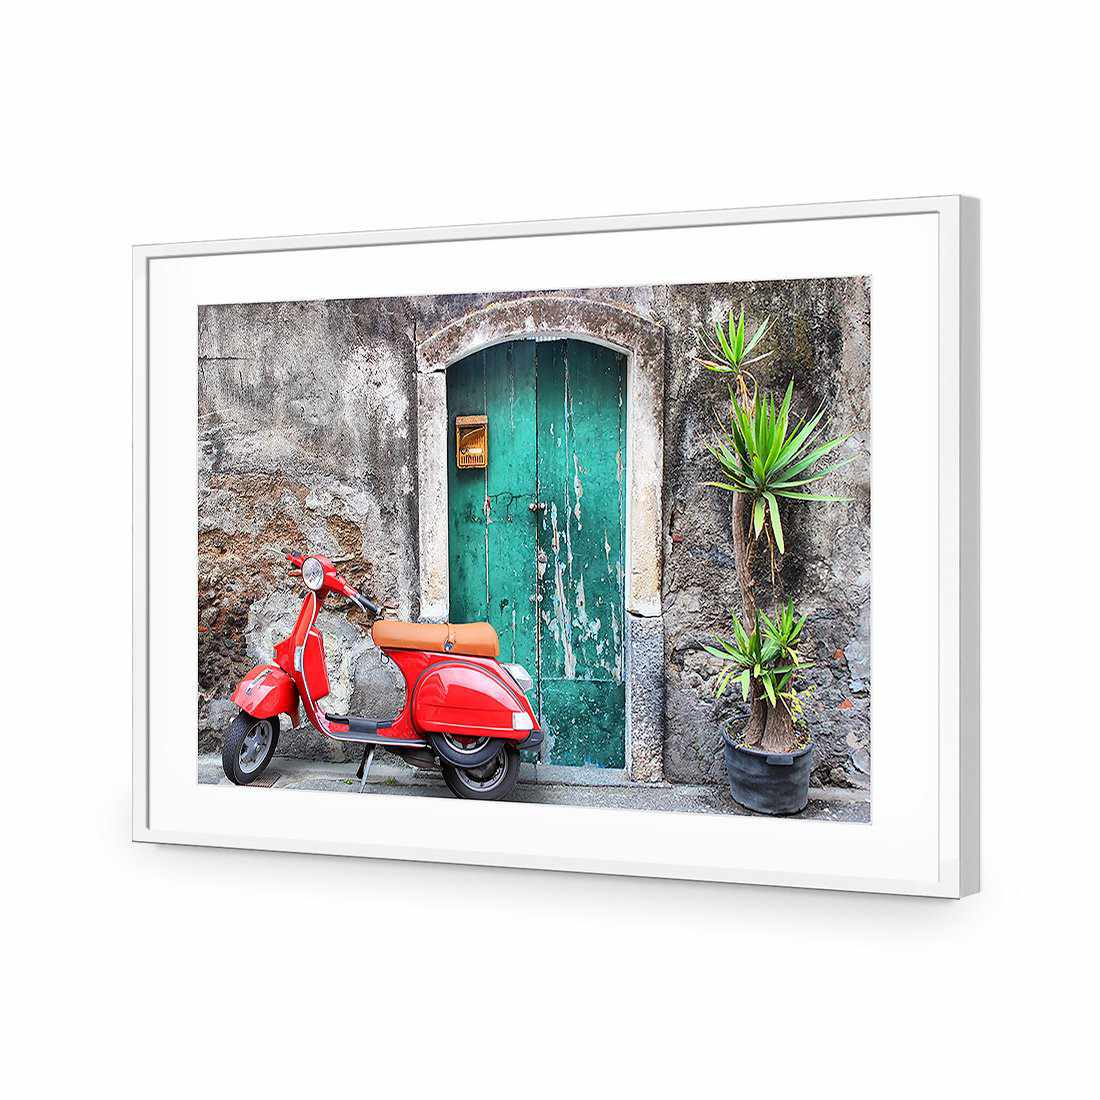 Vintage Door And Scooter-Acrylic-Wall Art Design-With Border-Acrylic - White Frame-45x30cm-Wall Art Designs